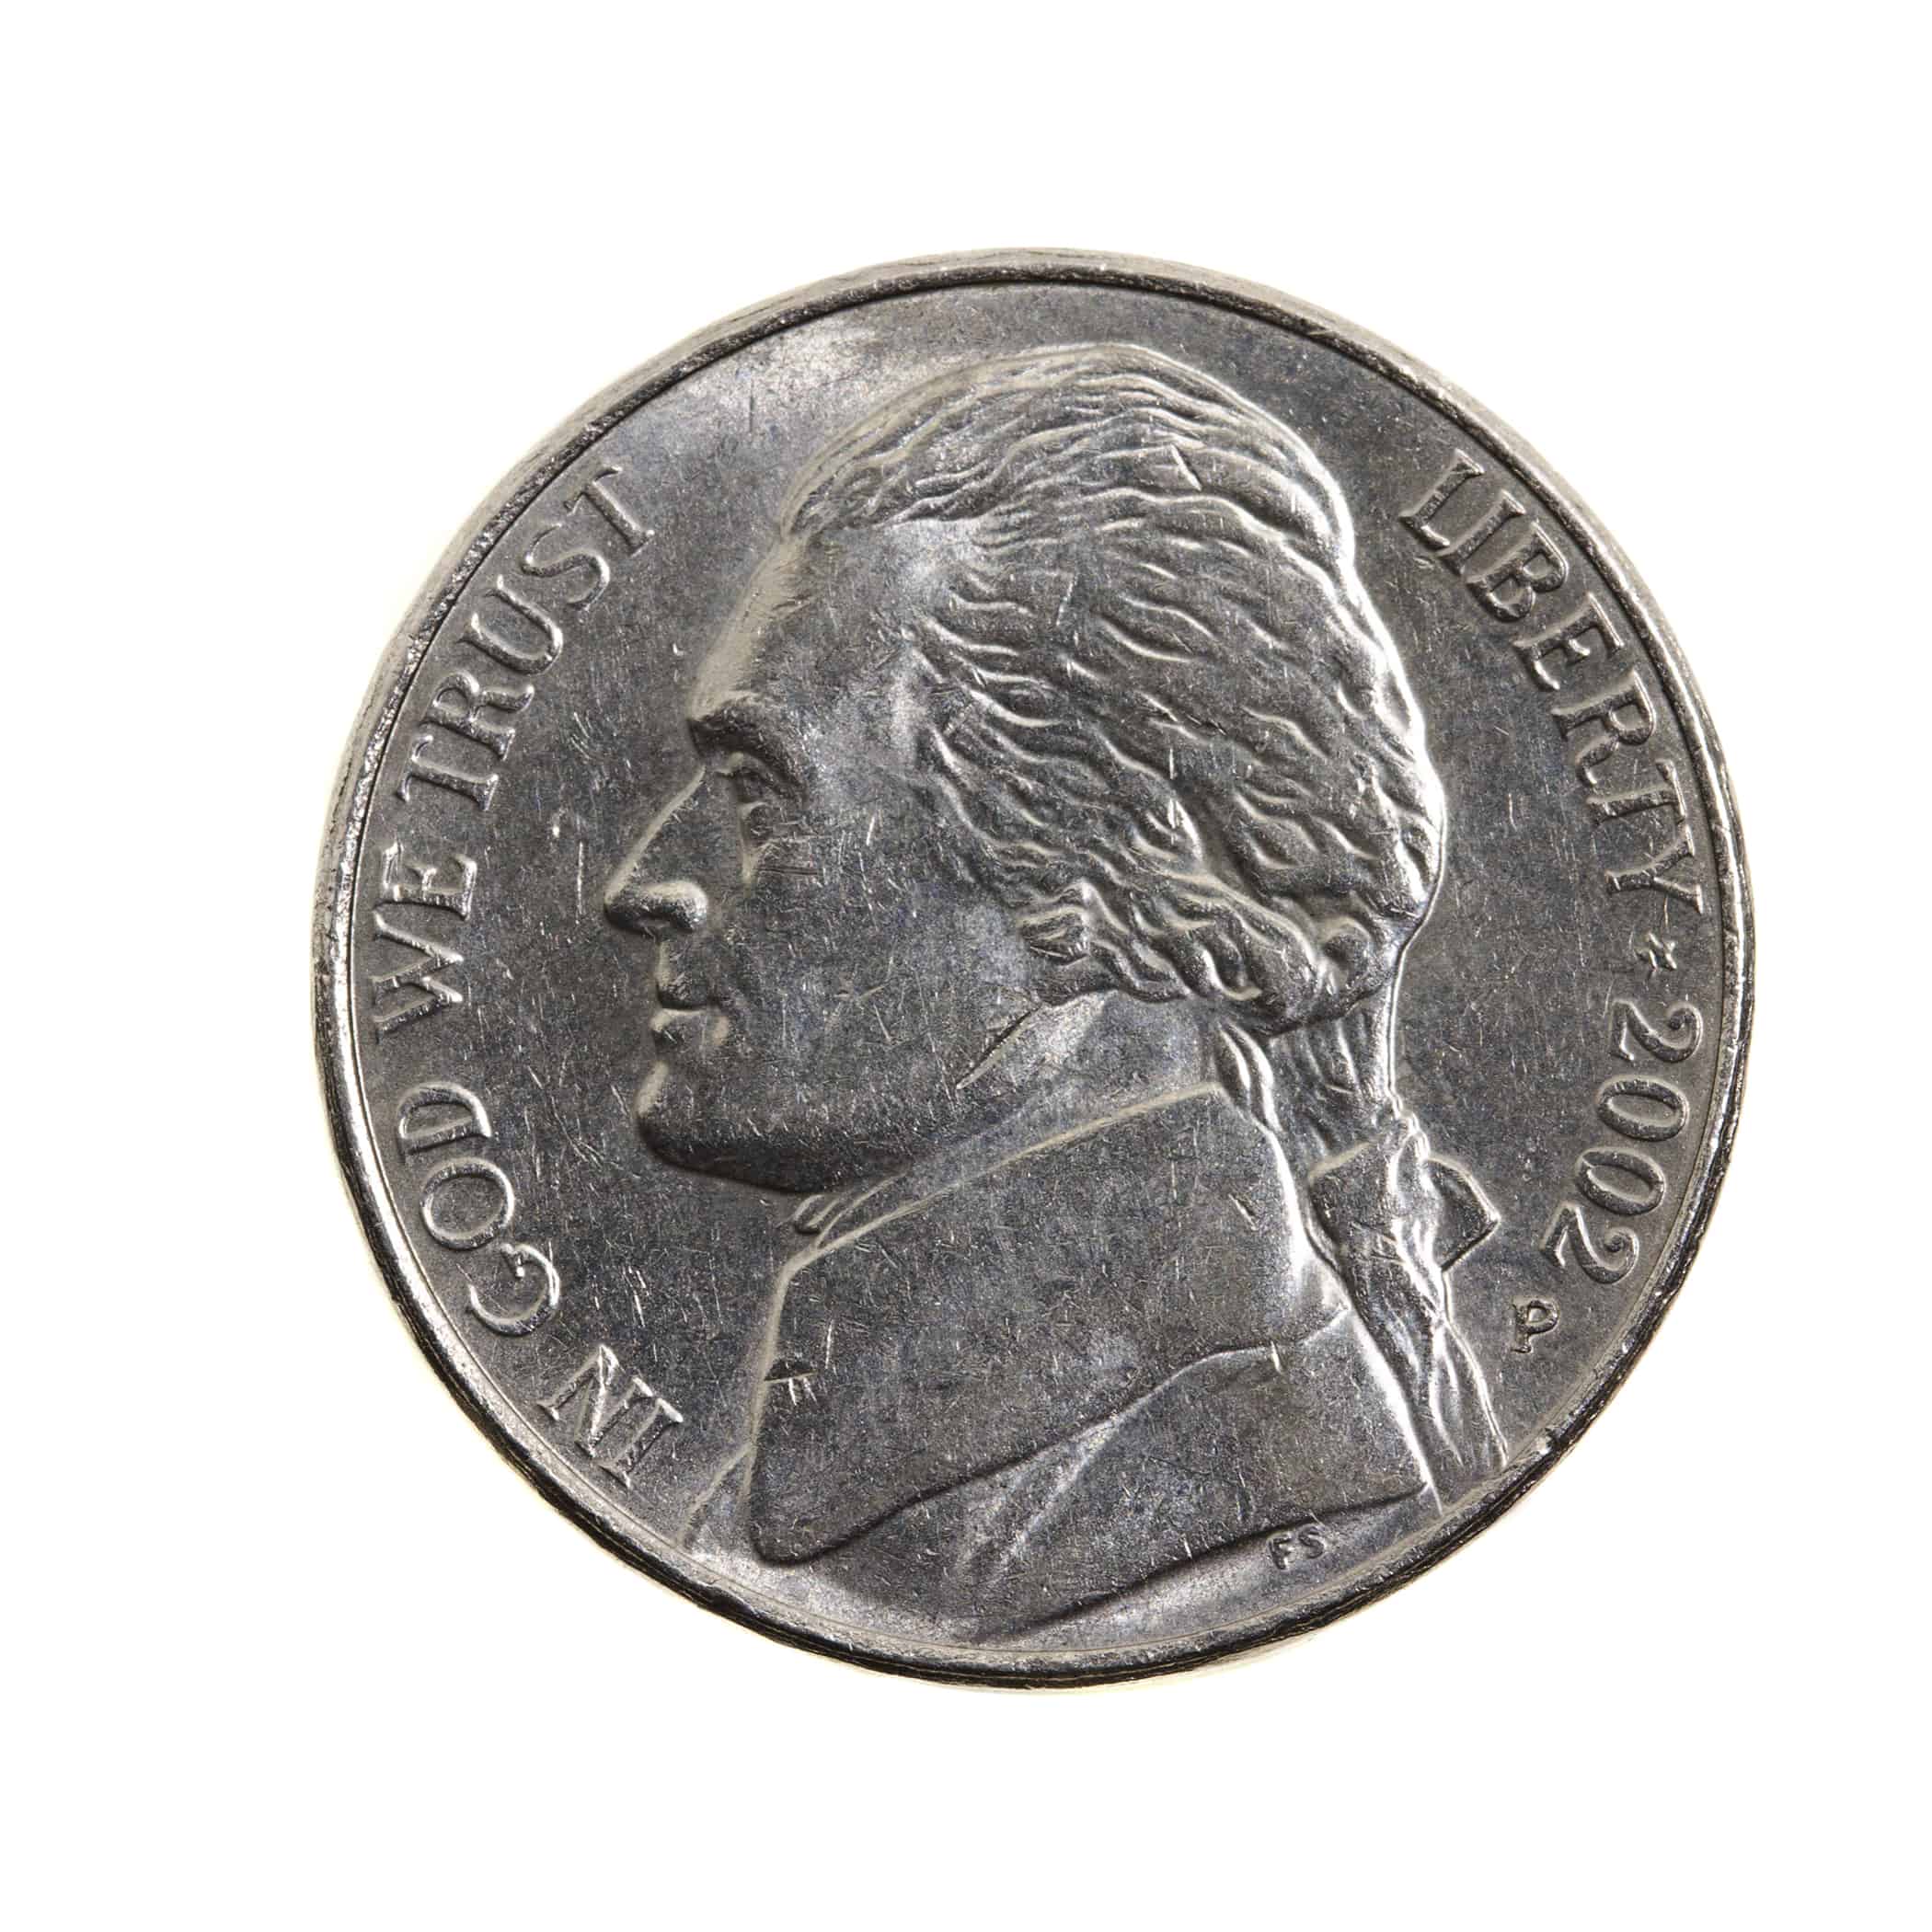 Obverse (Head) Features 5